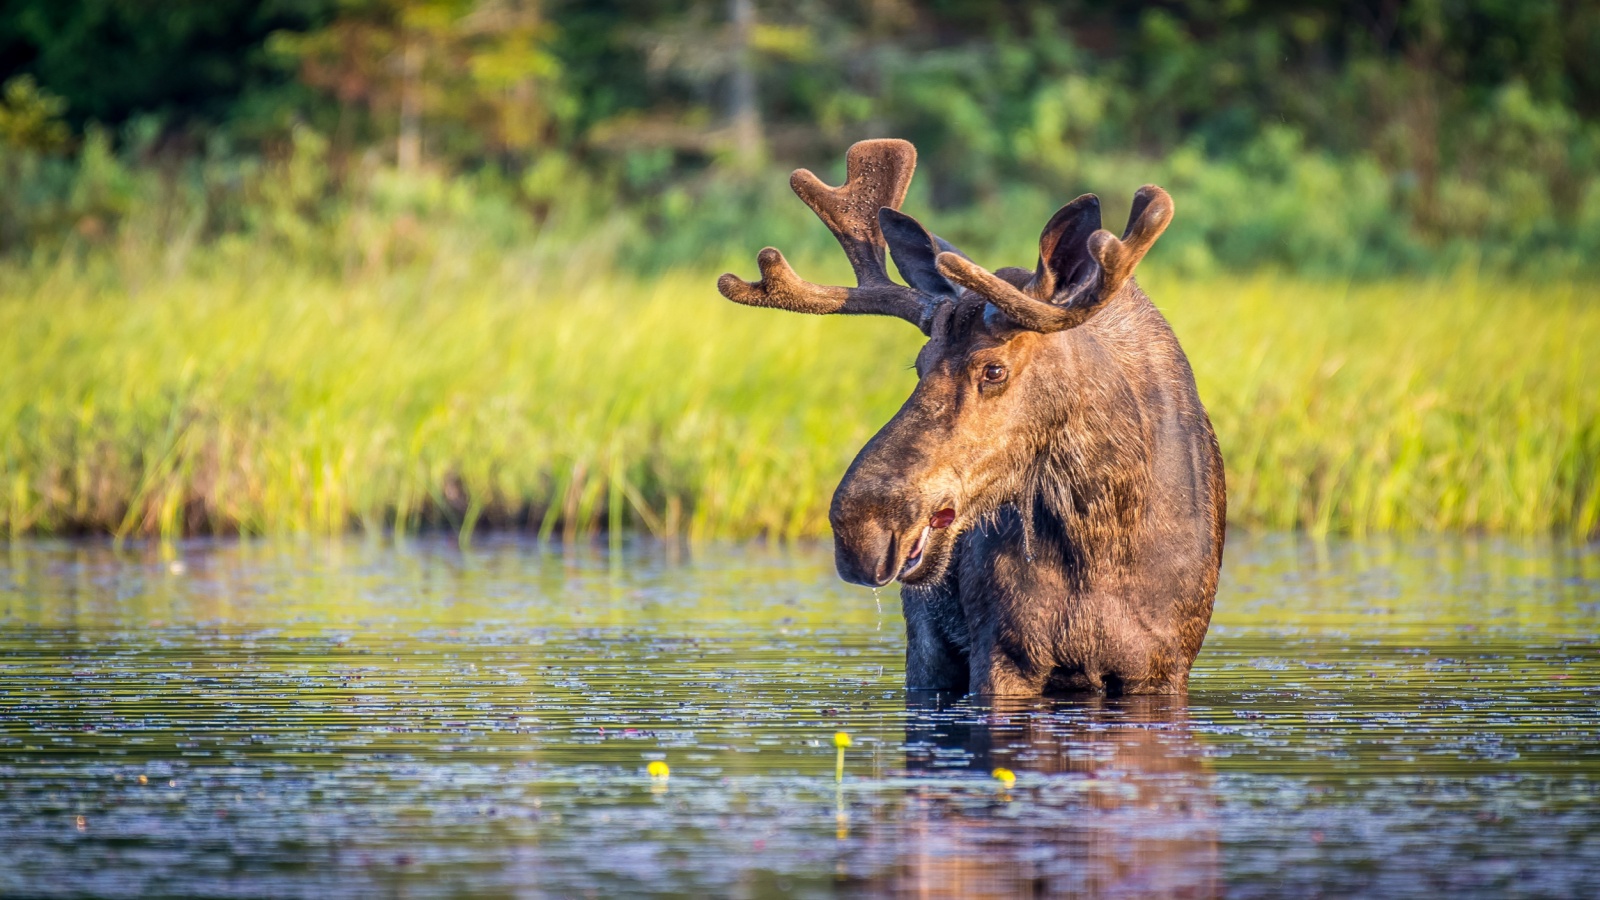 image credit: Mark Byer/Shutterstock <p>The moose, while not typically aggressive, ranks among North America’s most dangerous animals due to its sheer size and unpredictability. During mating season, bulls become exceptionally aggressive. Vehicle collisions with moose are a major concern in northern regions, often resulting in serious injuries or fatalities.</p>